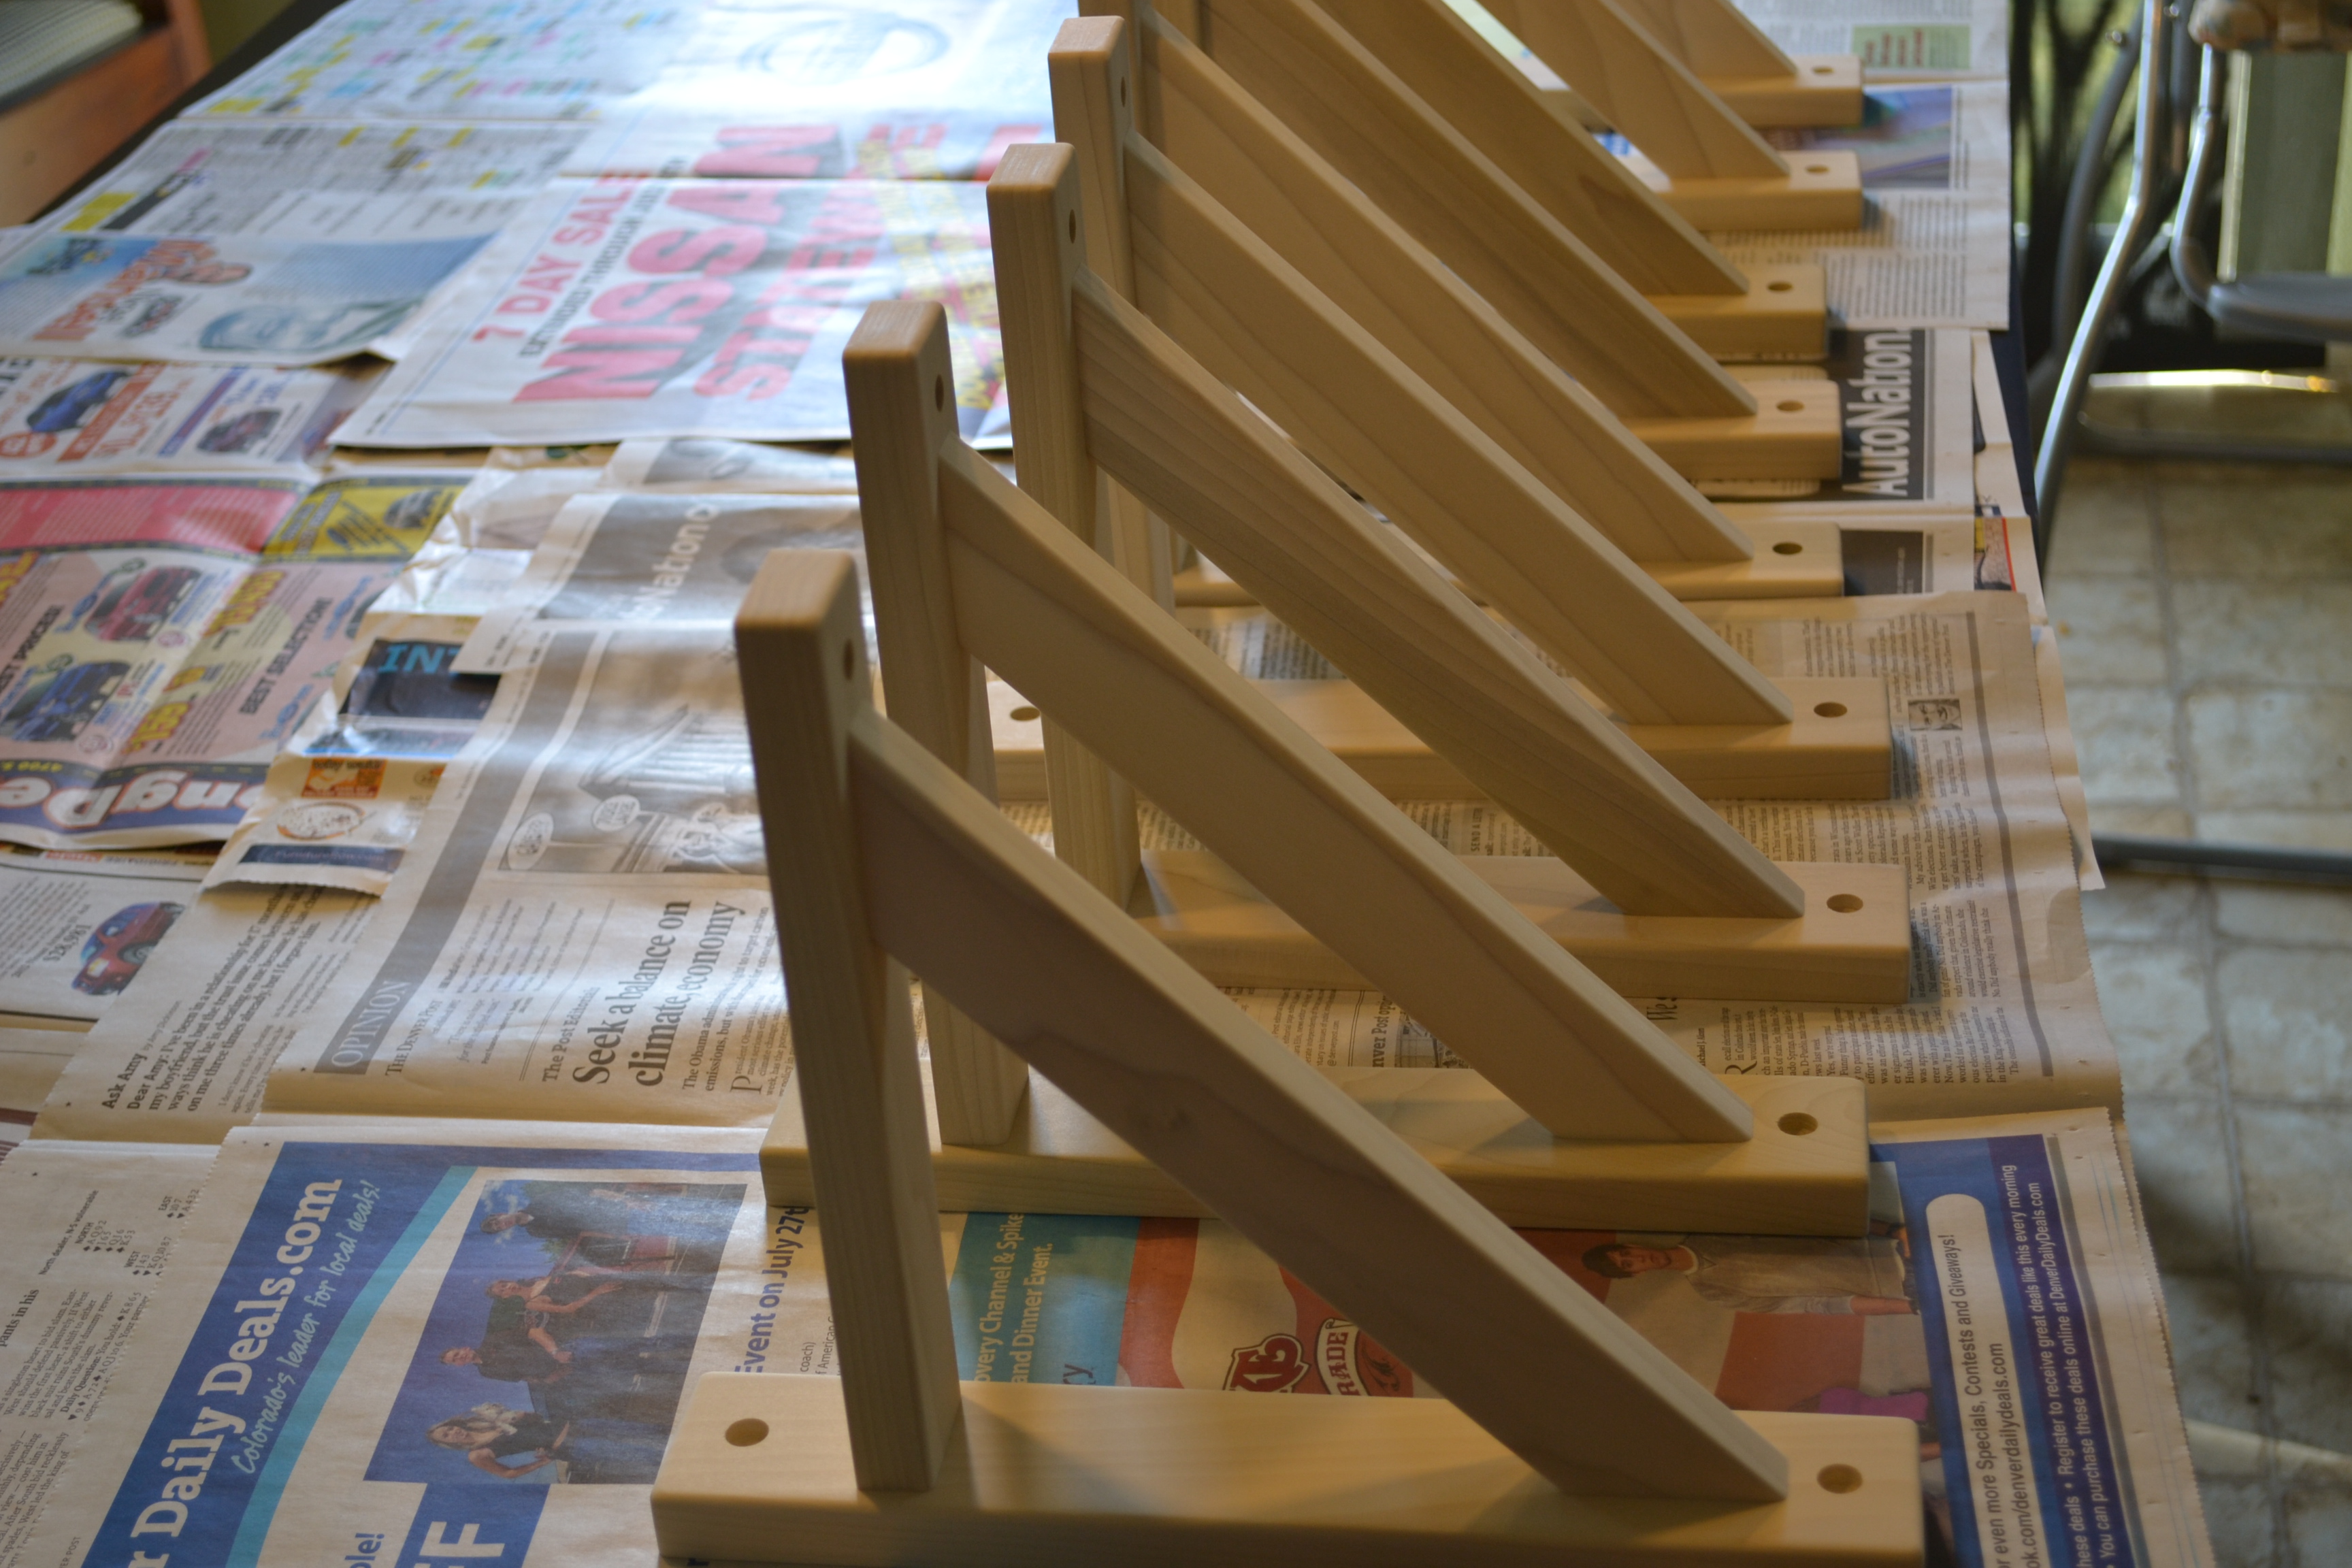 Saturday, I lined up the shelf brackets for painting. They come pre 